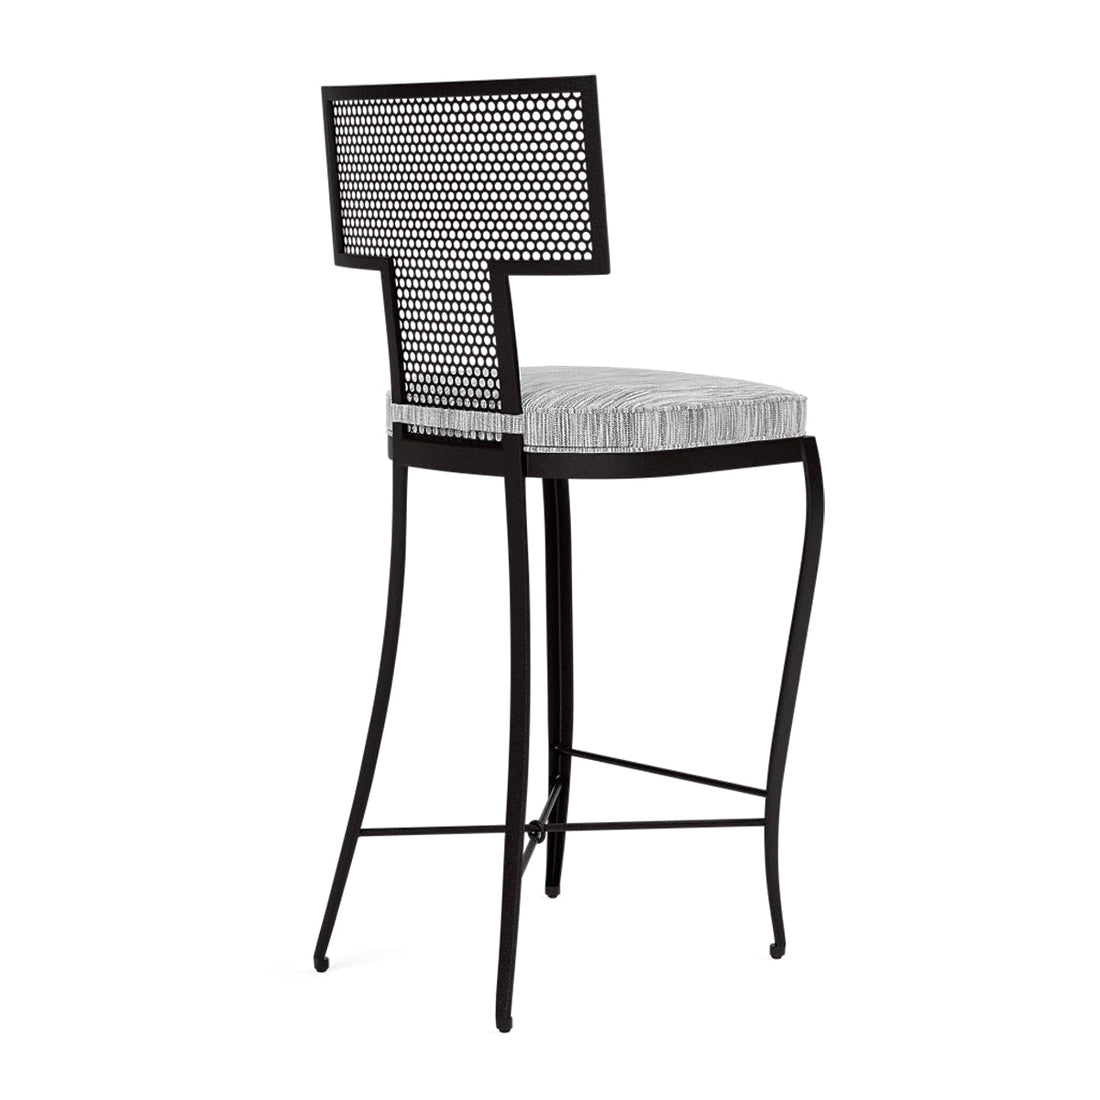 Made Goods Hadley Metal Outdoor Counter Stool in Danube Fabric